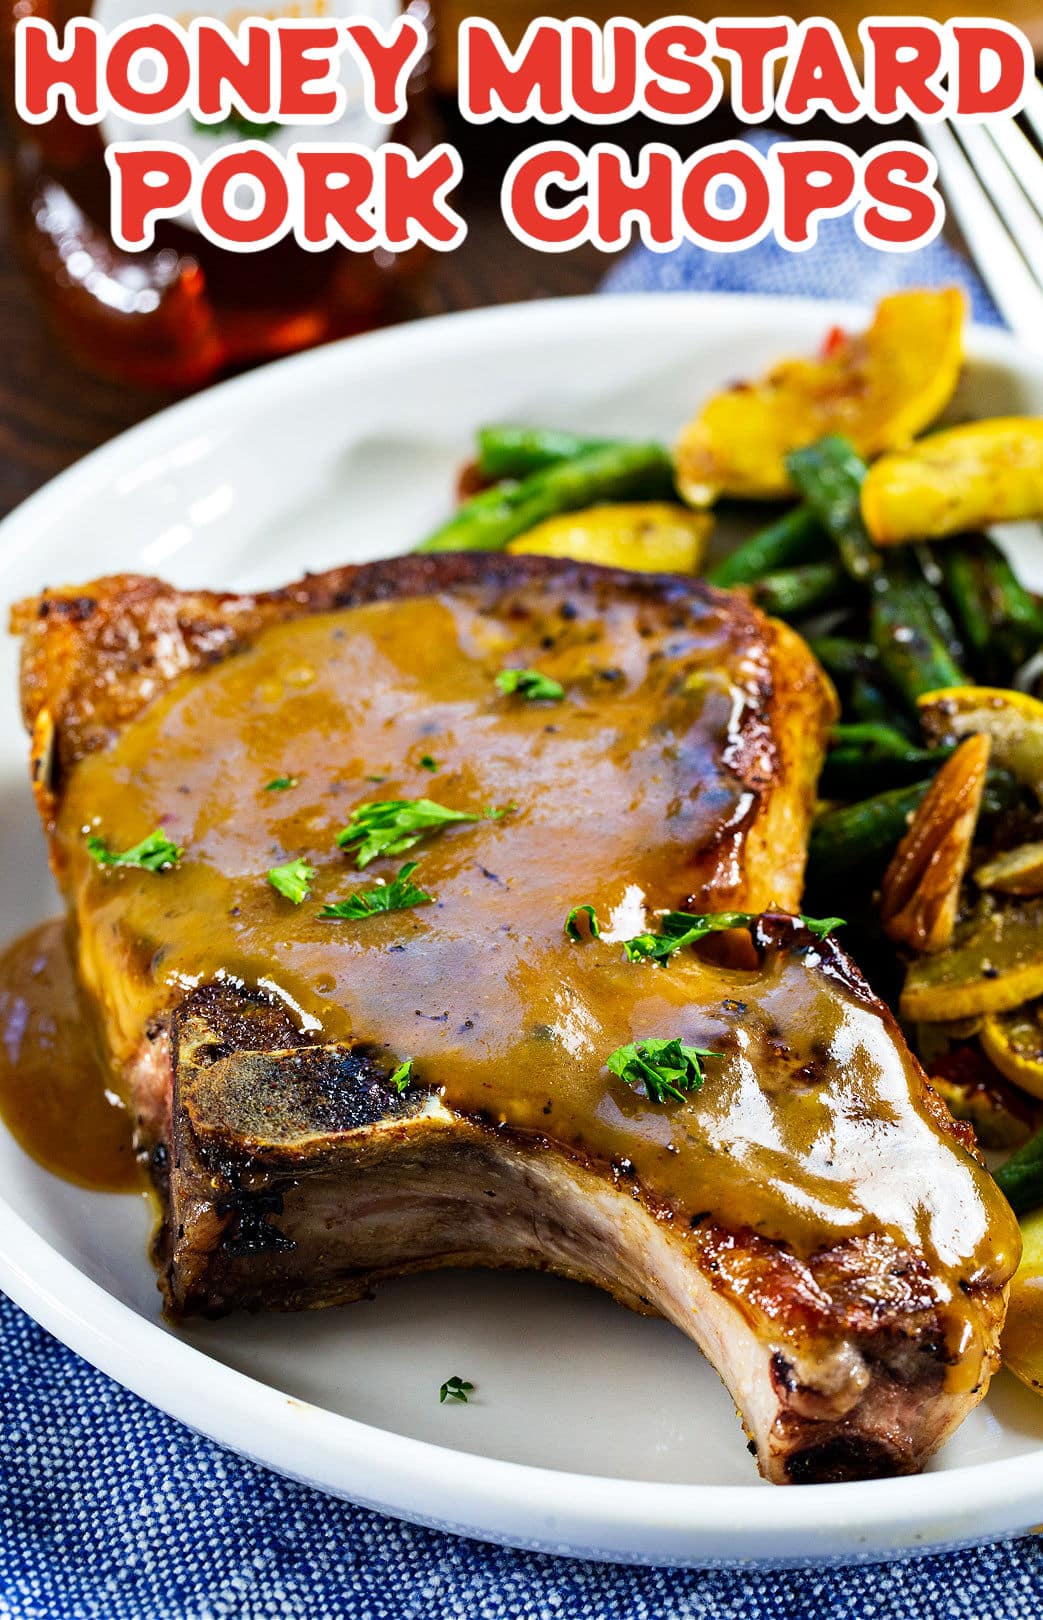 Honey Mustard Pork Chop on plate with green beans and squash/